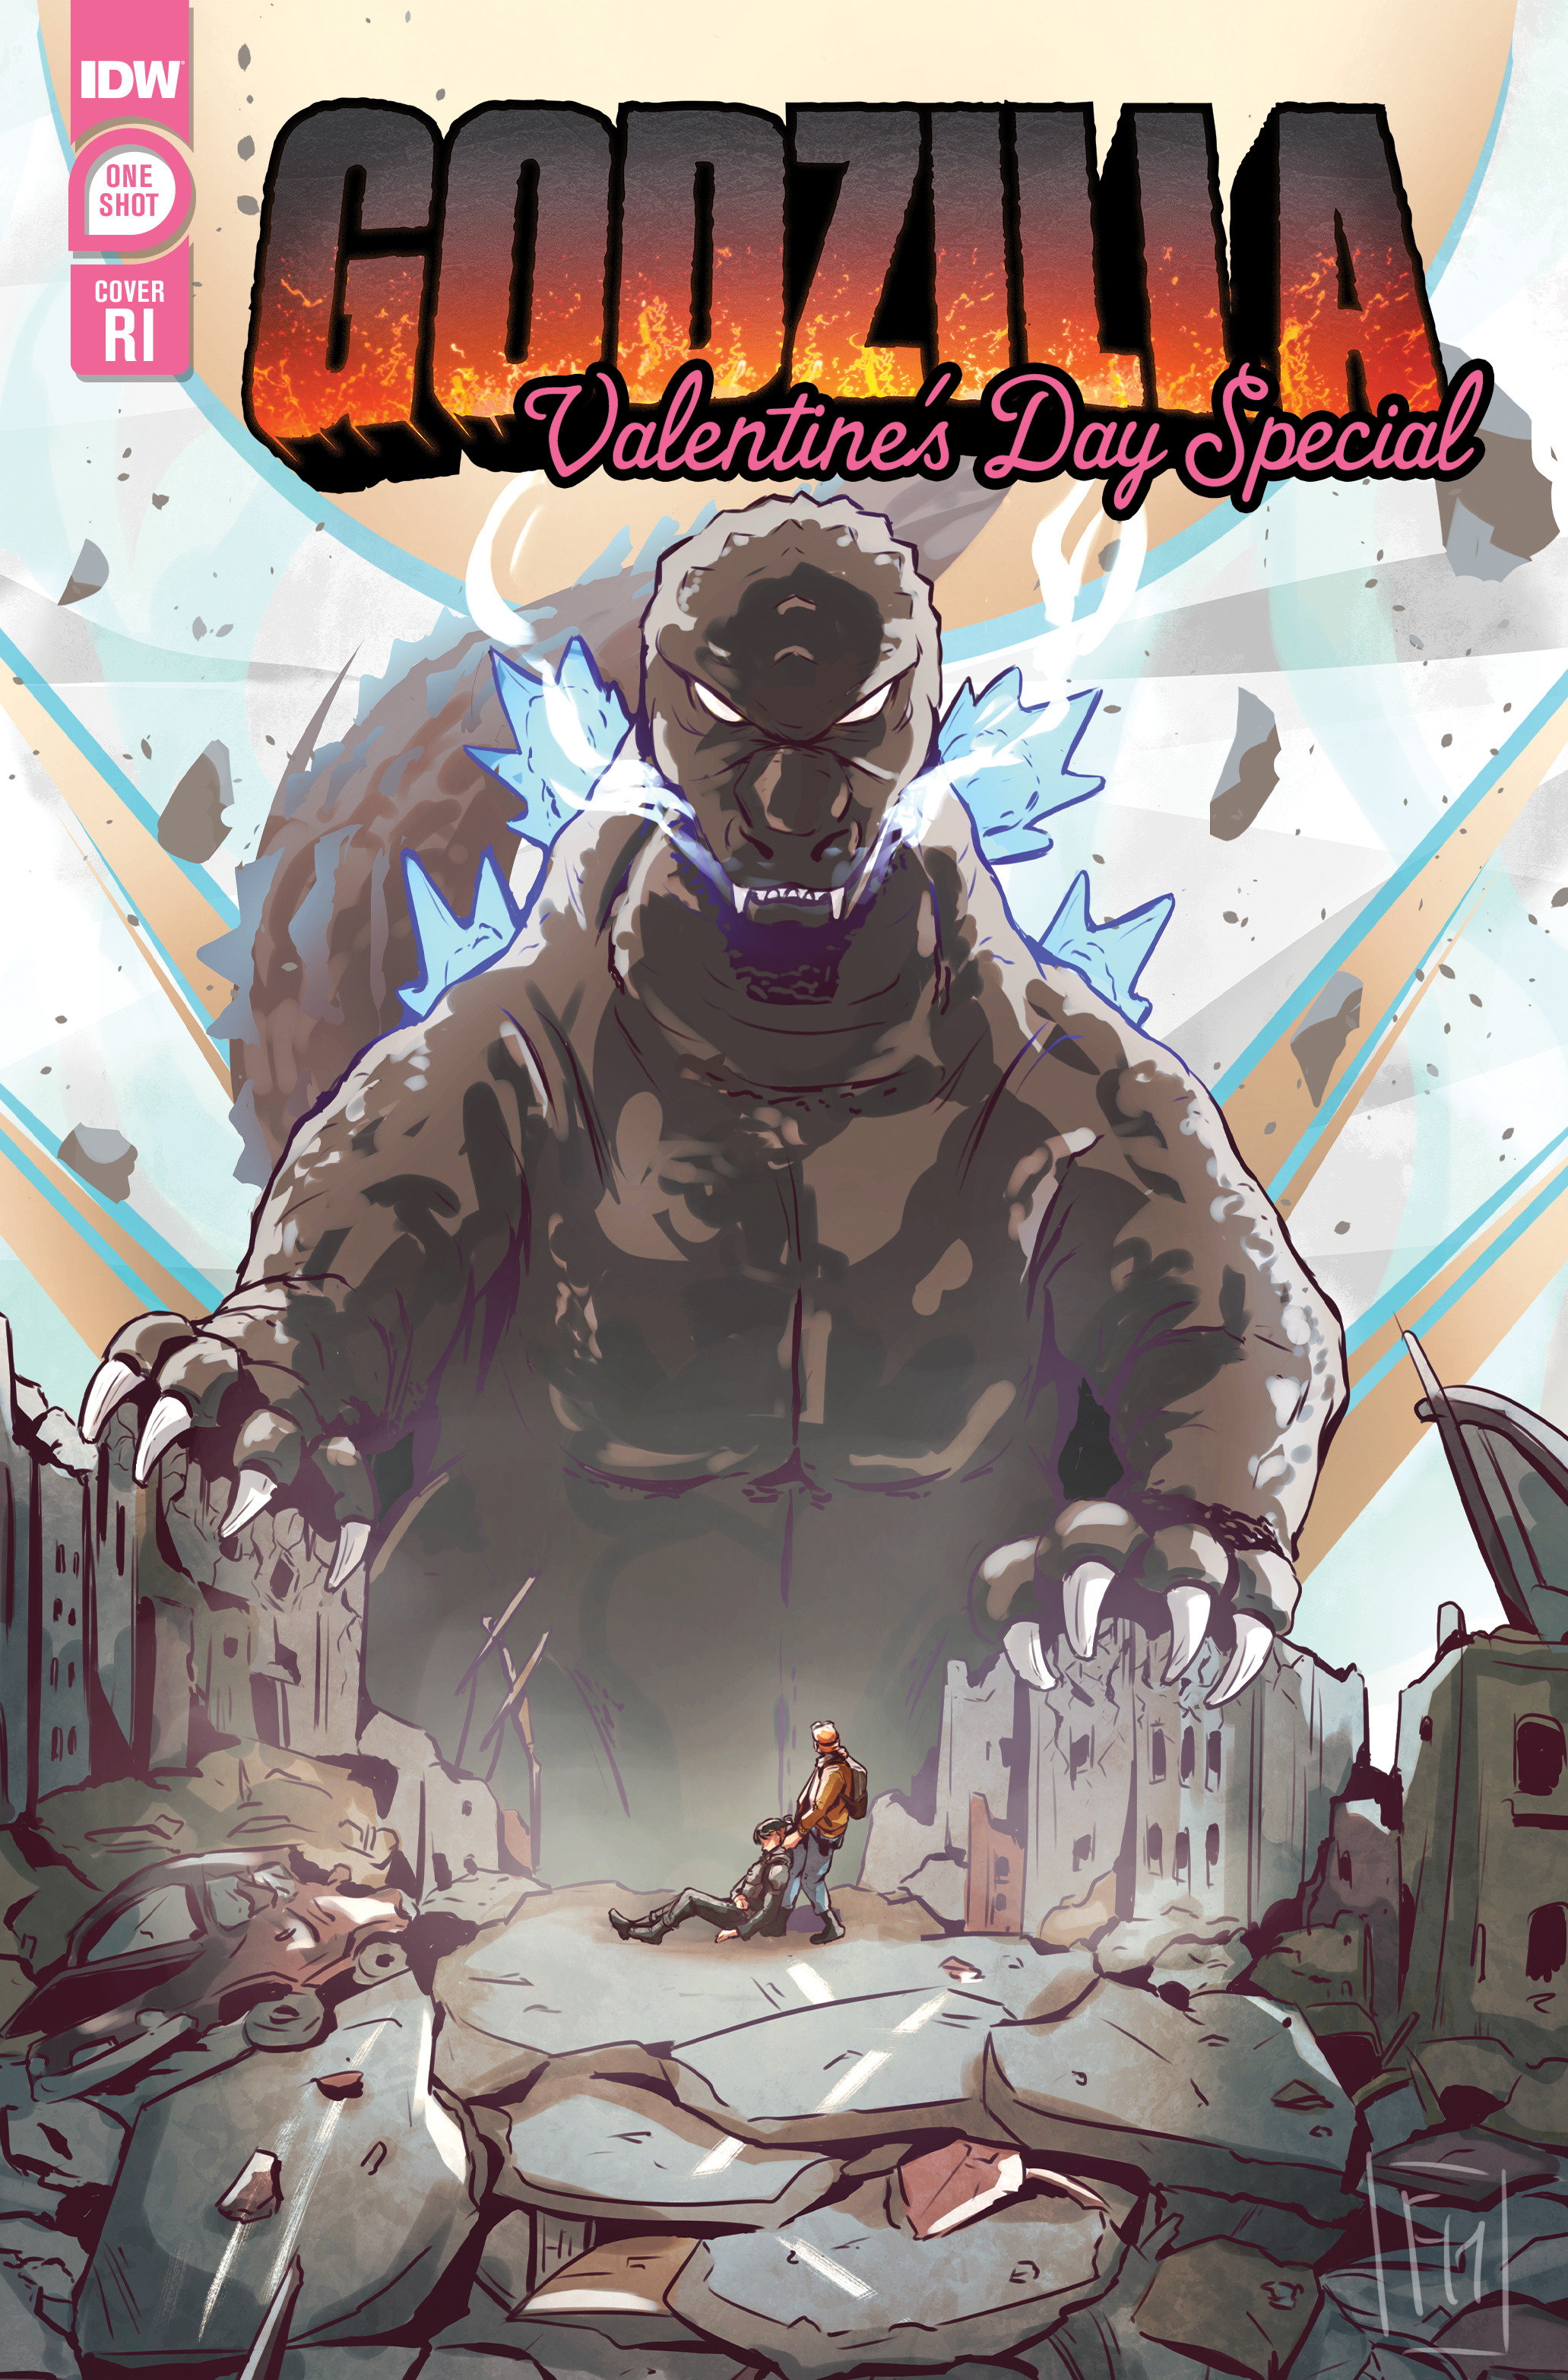 Godzilla Valentine's Day Special Cover Hound 1 for 10 Incentive